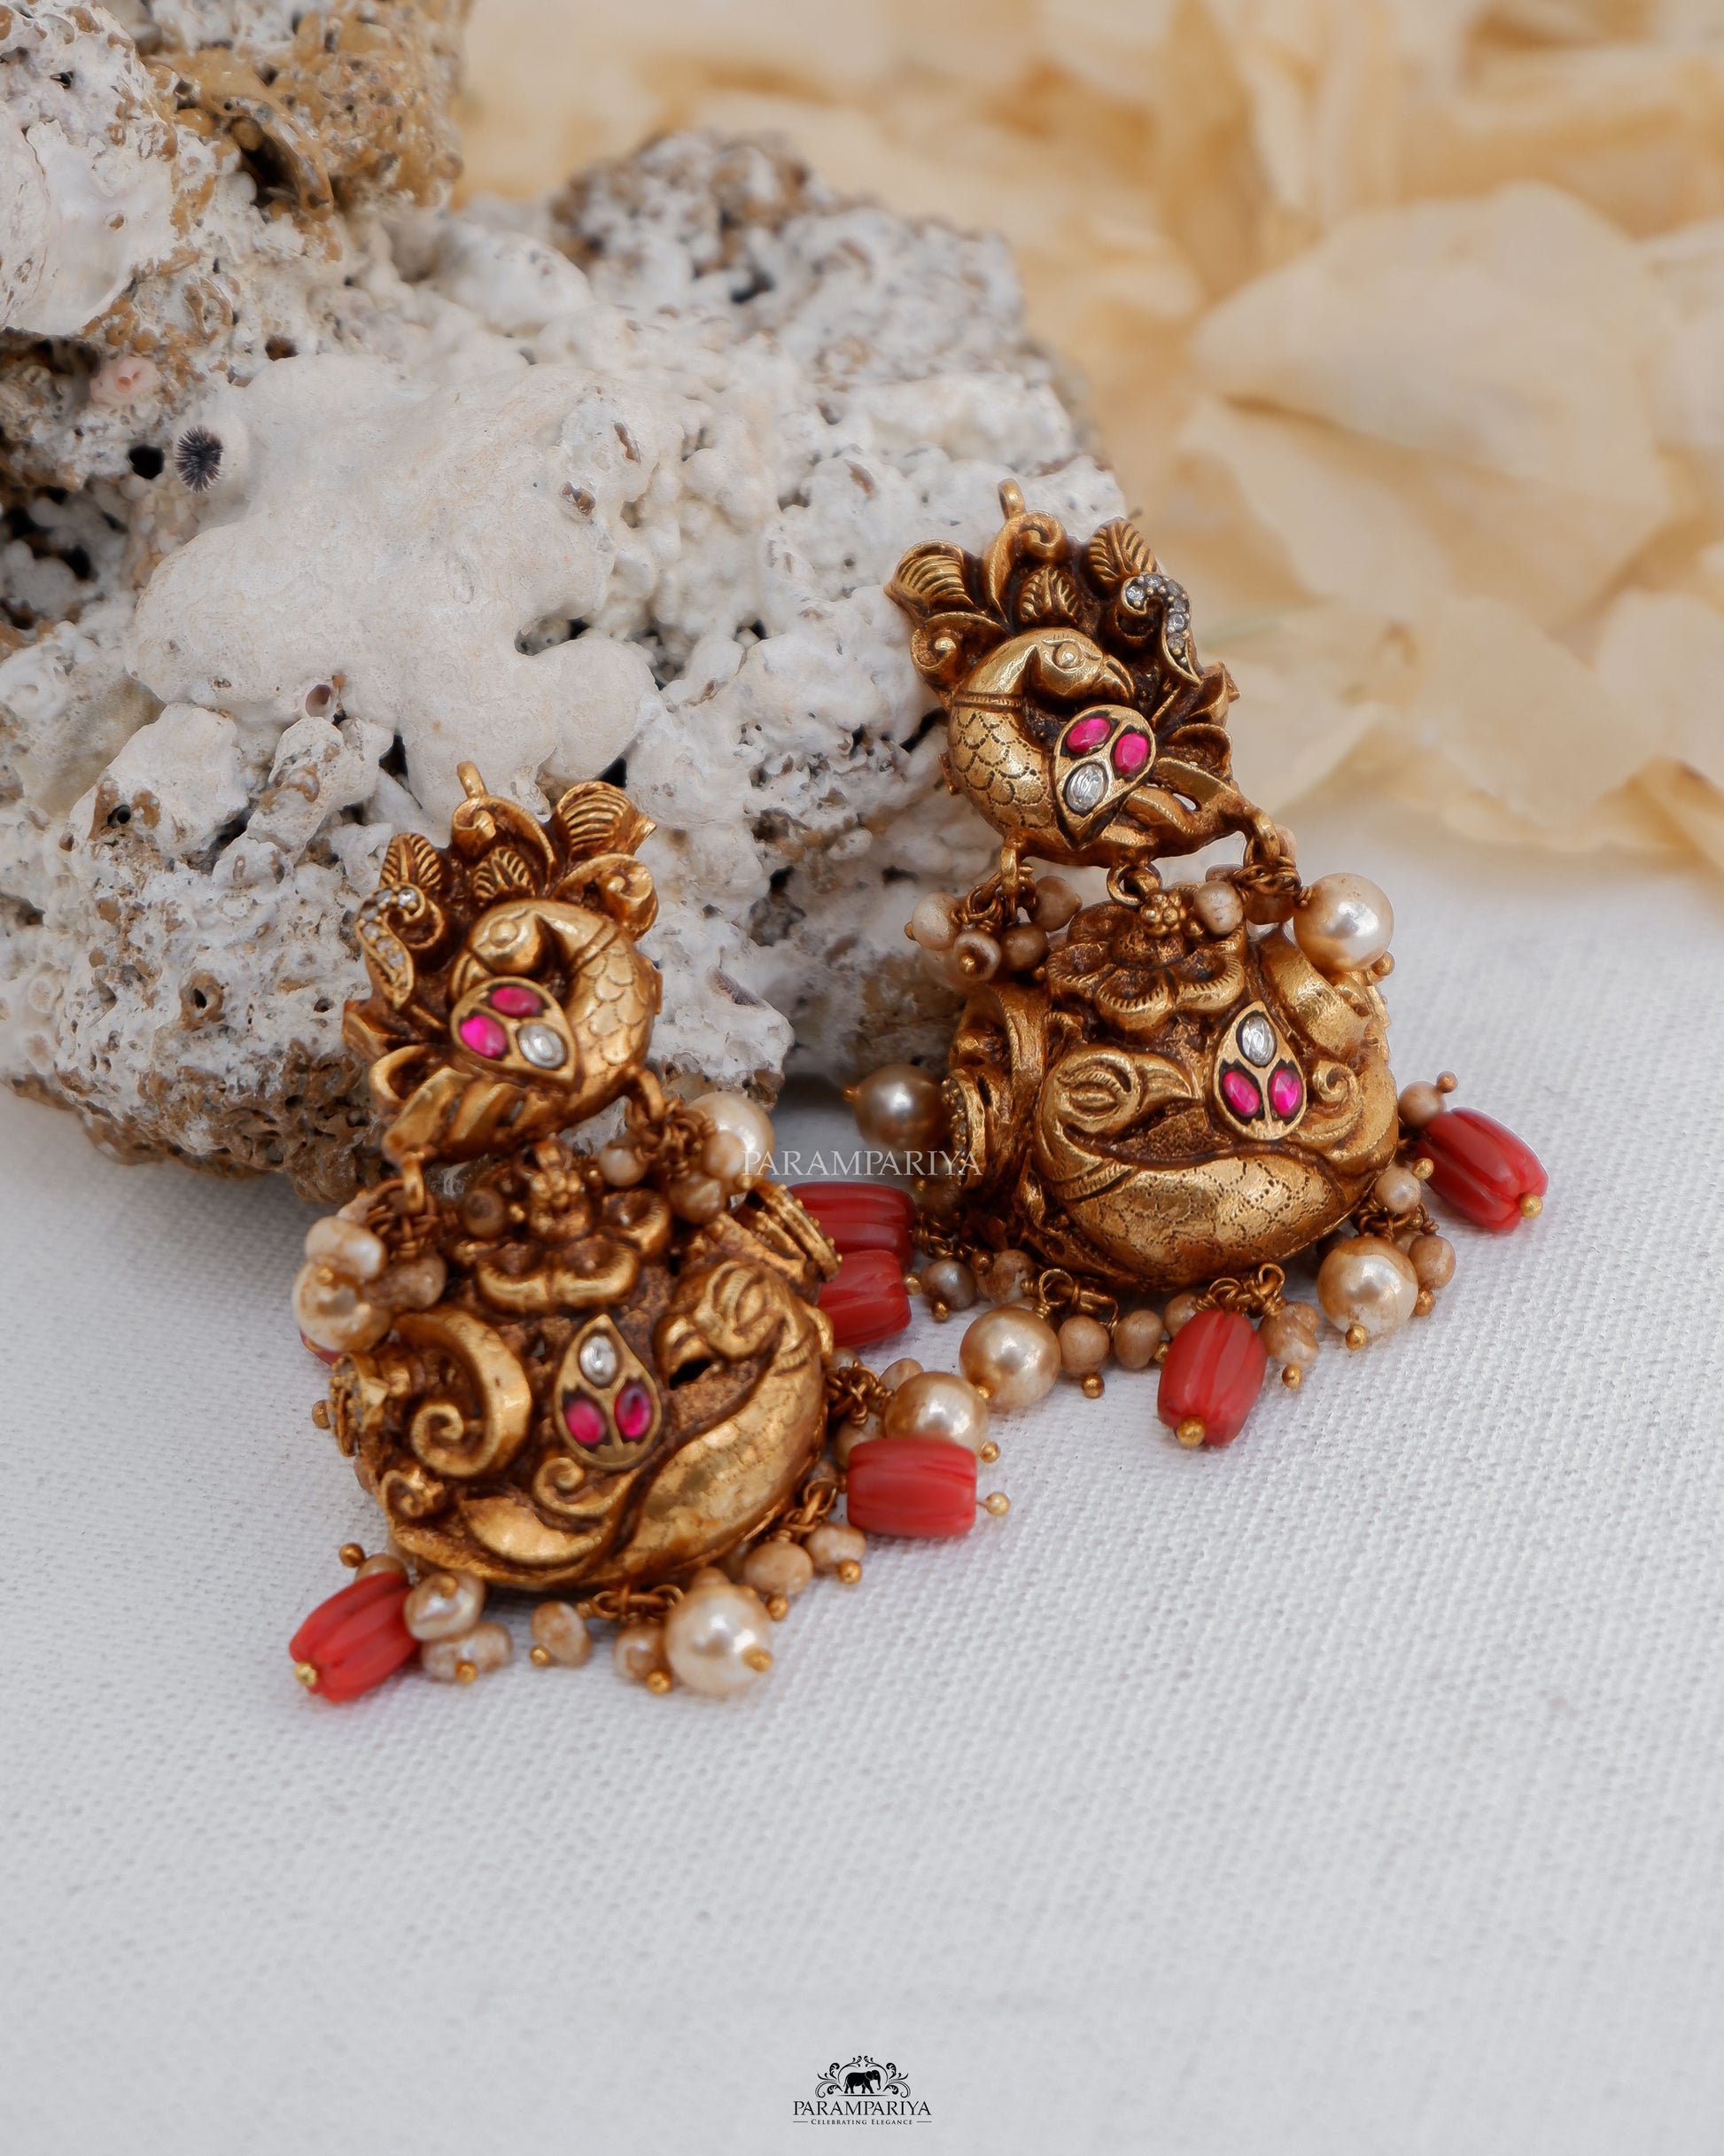 Pure silver micron gold plated nakshi earrings with kundan stones in antique finish for an ethnic look with coral beads.